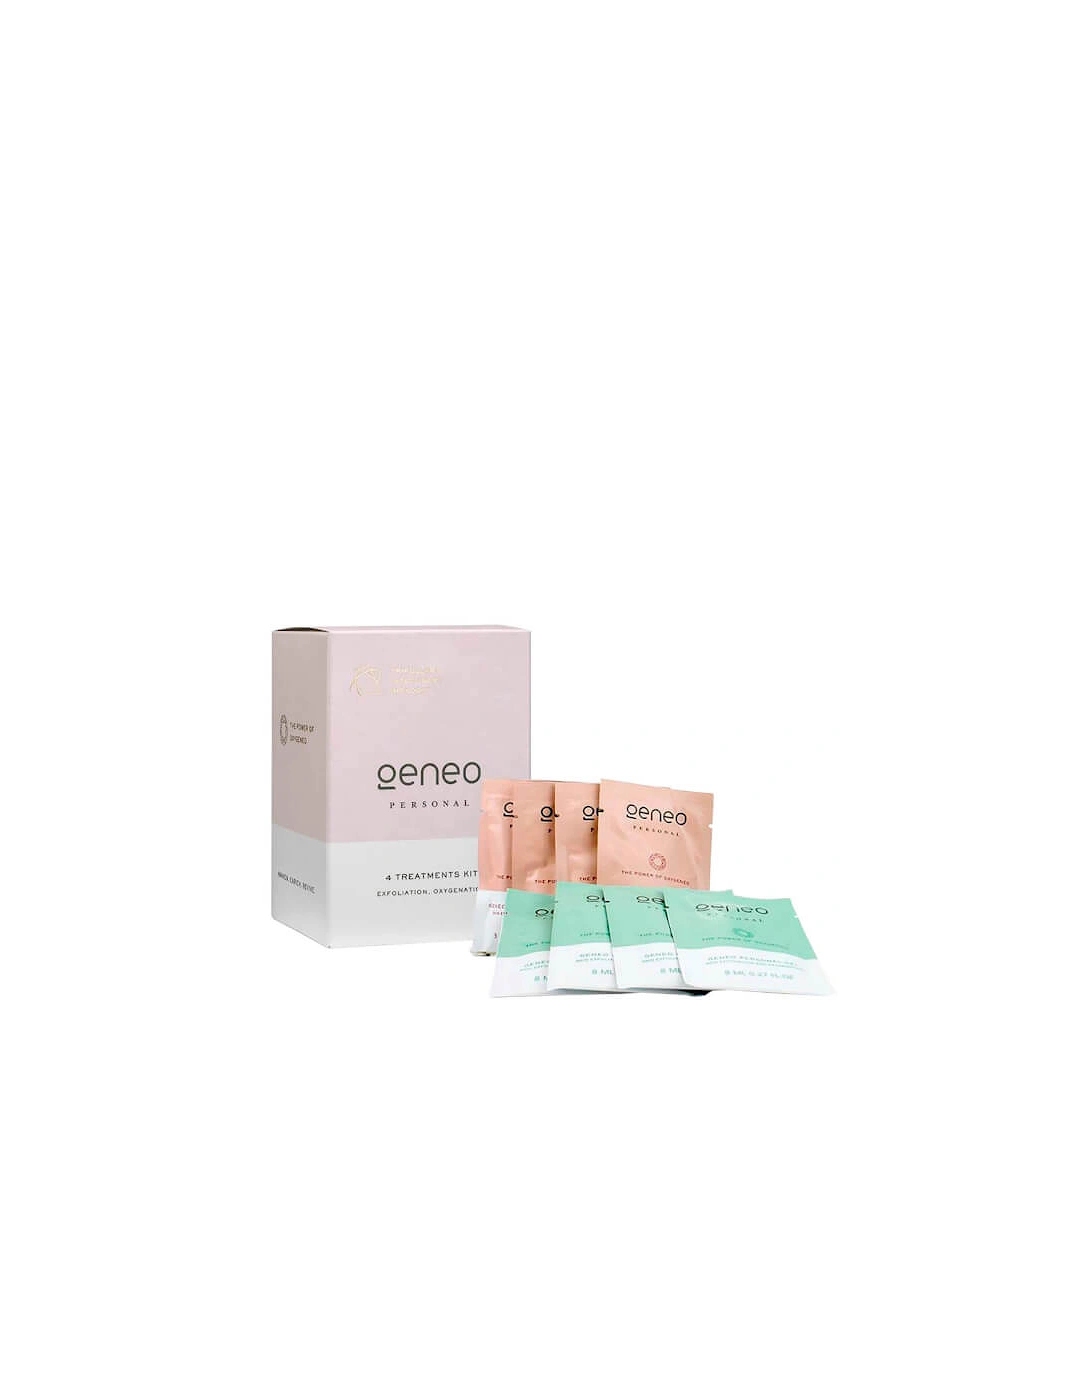 GENEO PERSONAL 4 Treatment Kit, 2 of 1